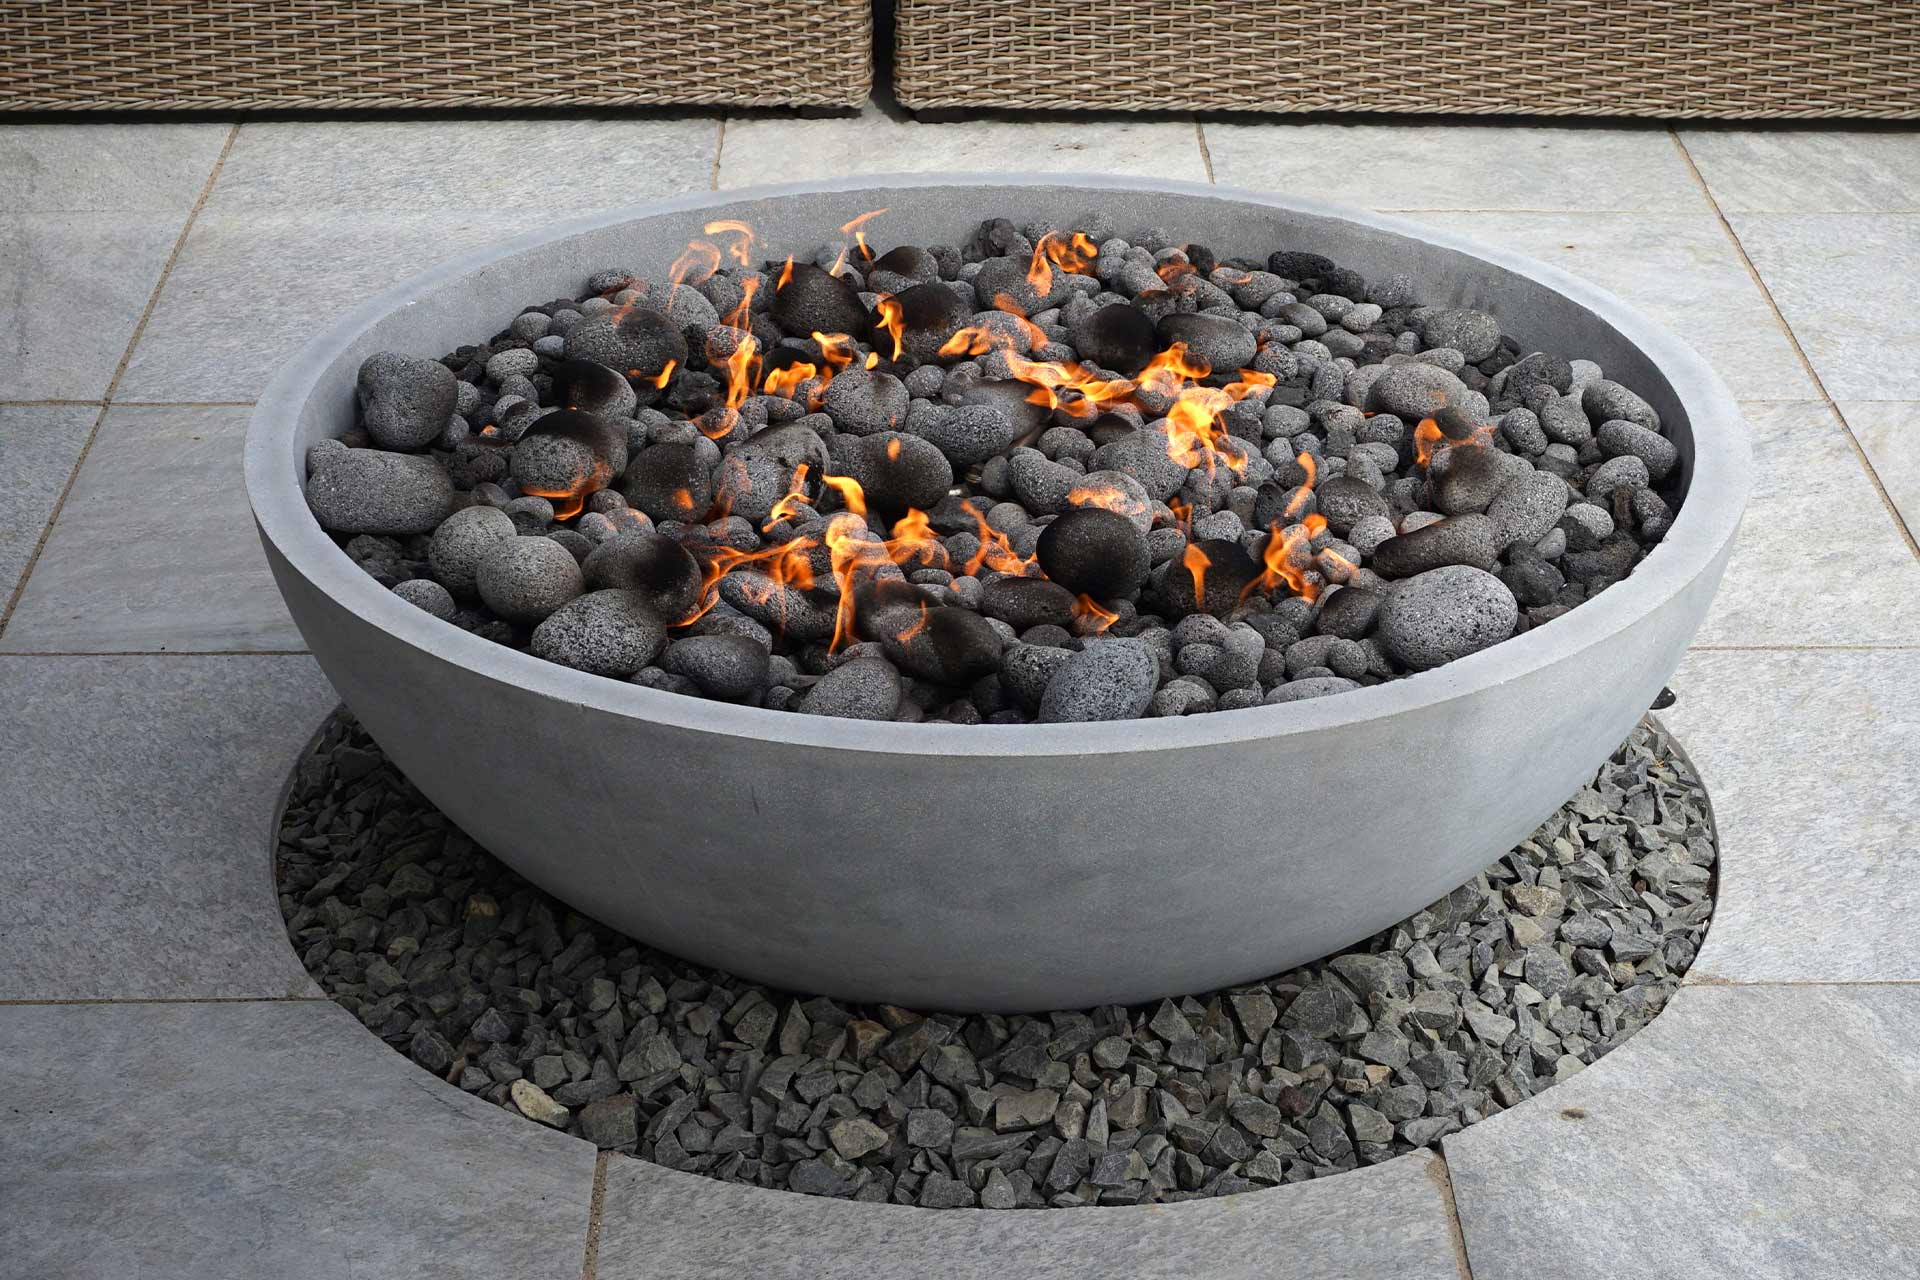 How Much Does A Fire Pit Cost In 2022, How Much Does It Cost To Build A Fire Pit In Backyard